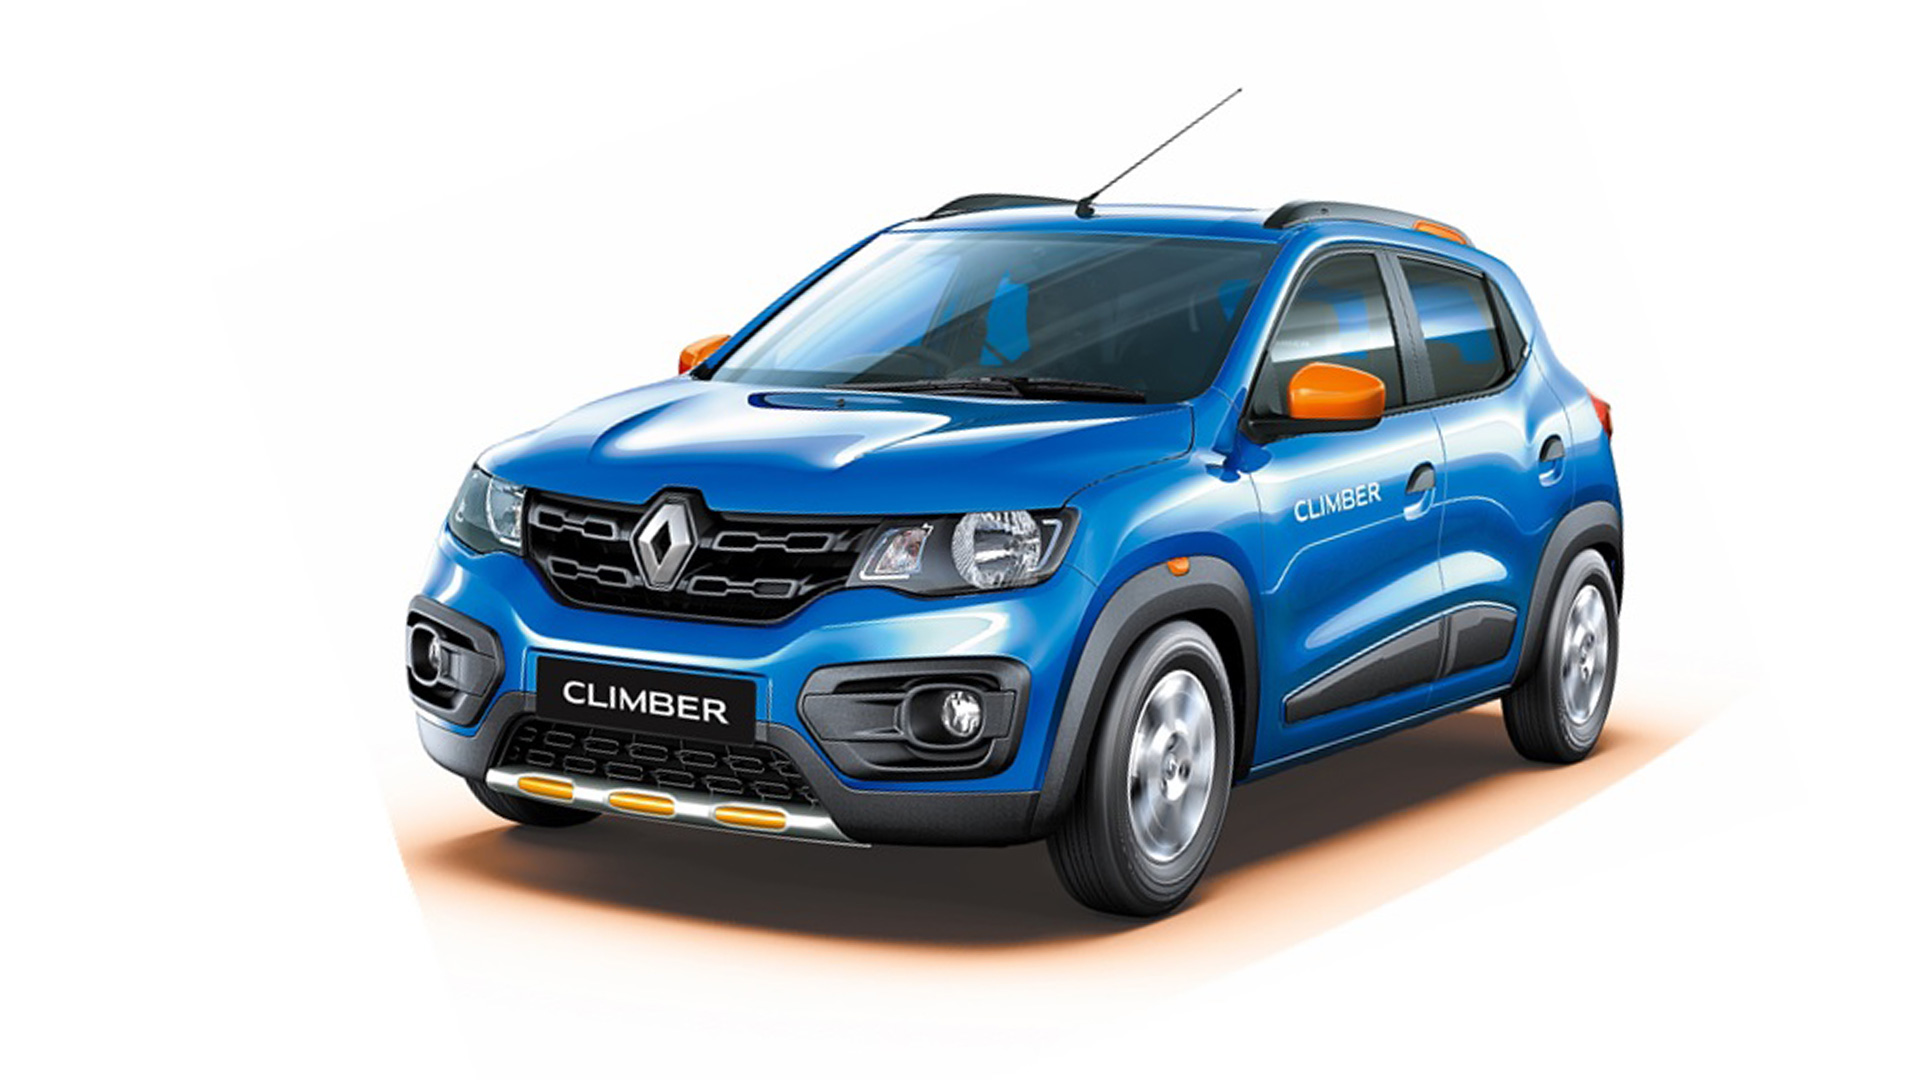 Renault Kwid Car Images And Price